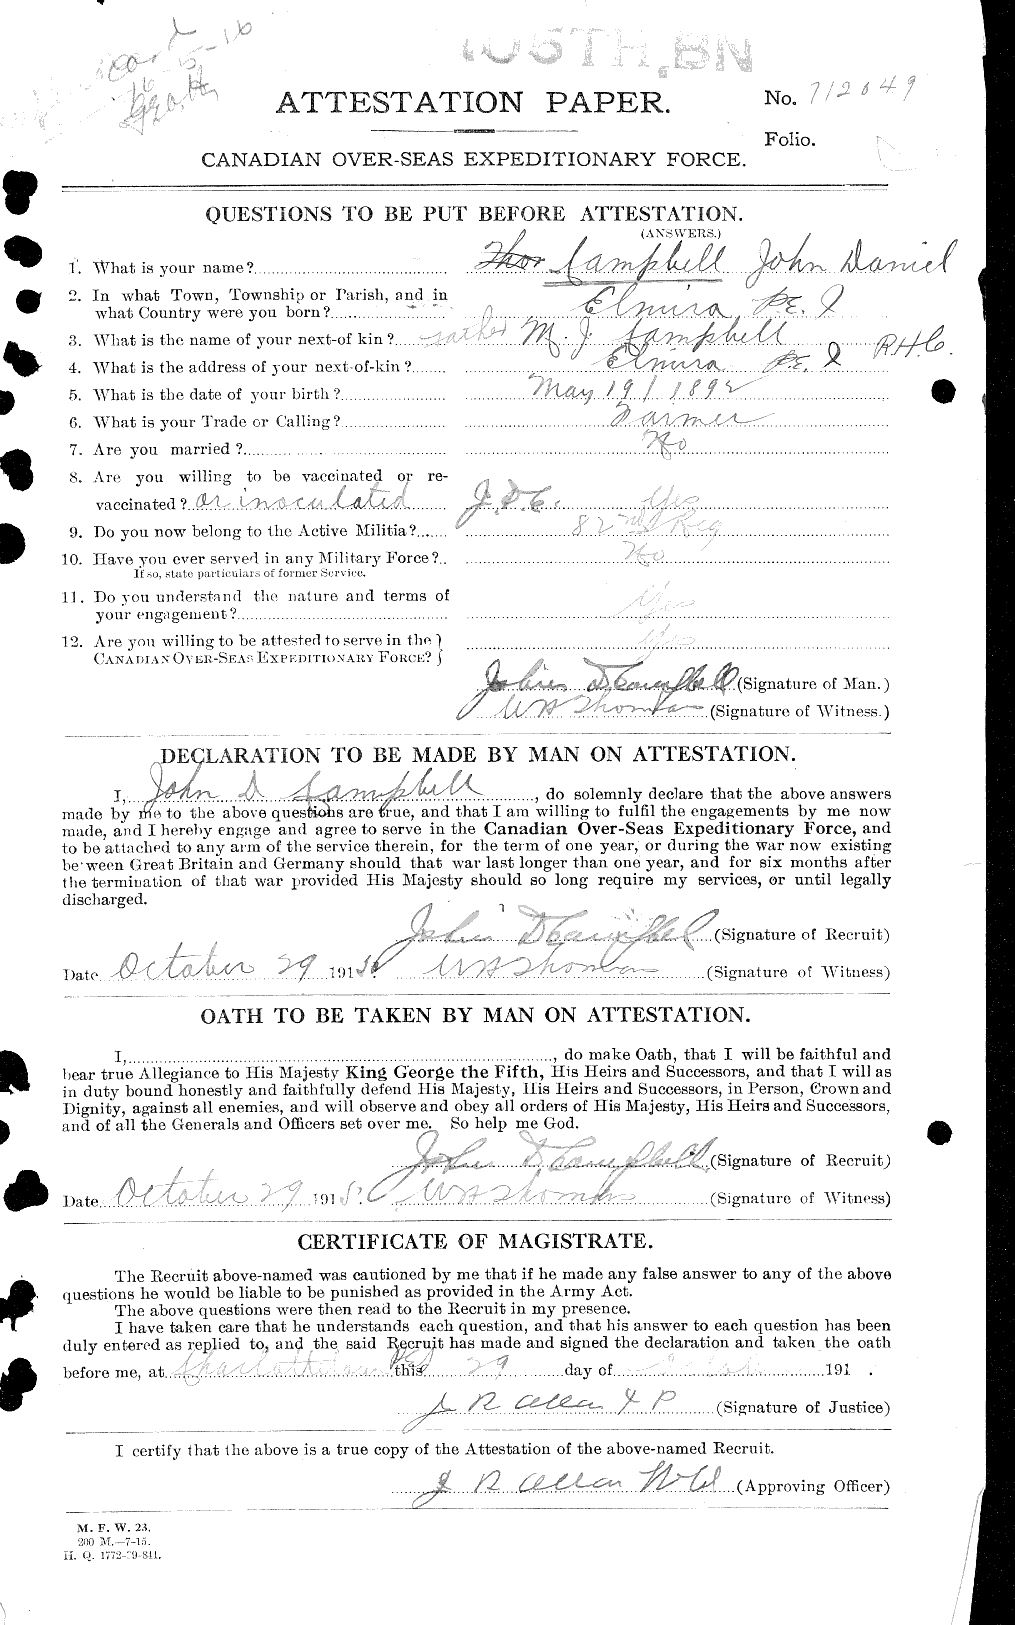 Personnel Records of the First World War - CEF 006889a